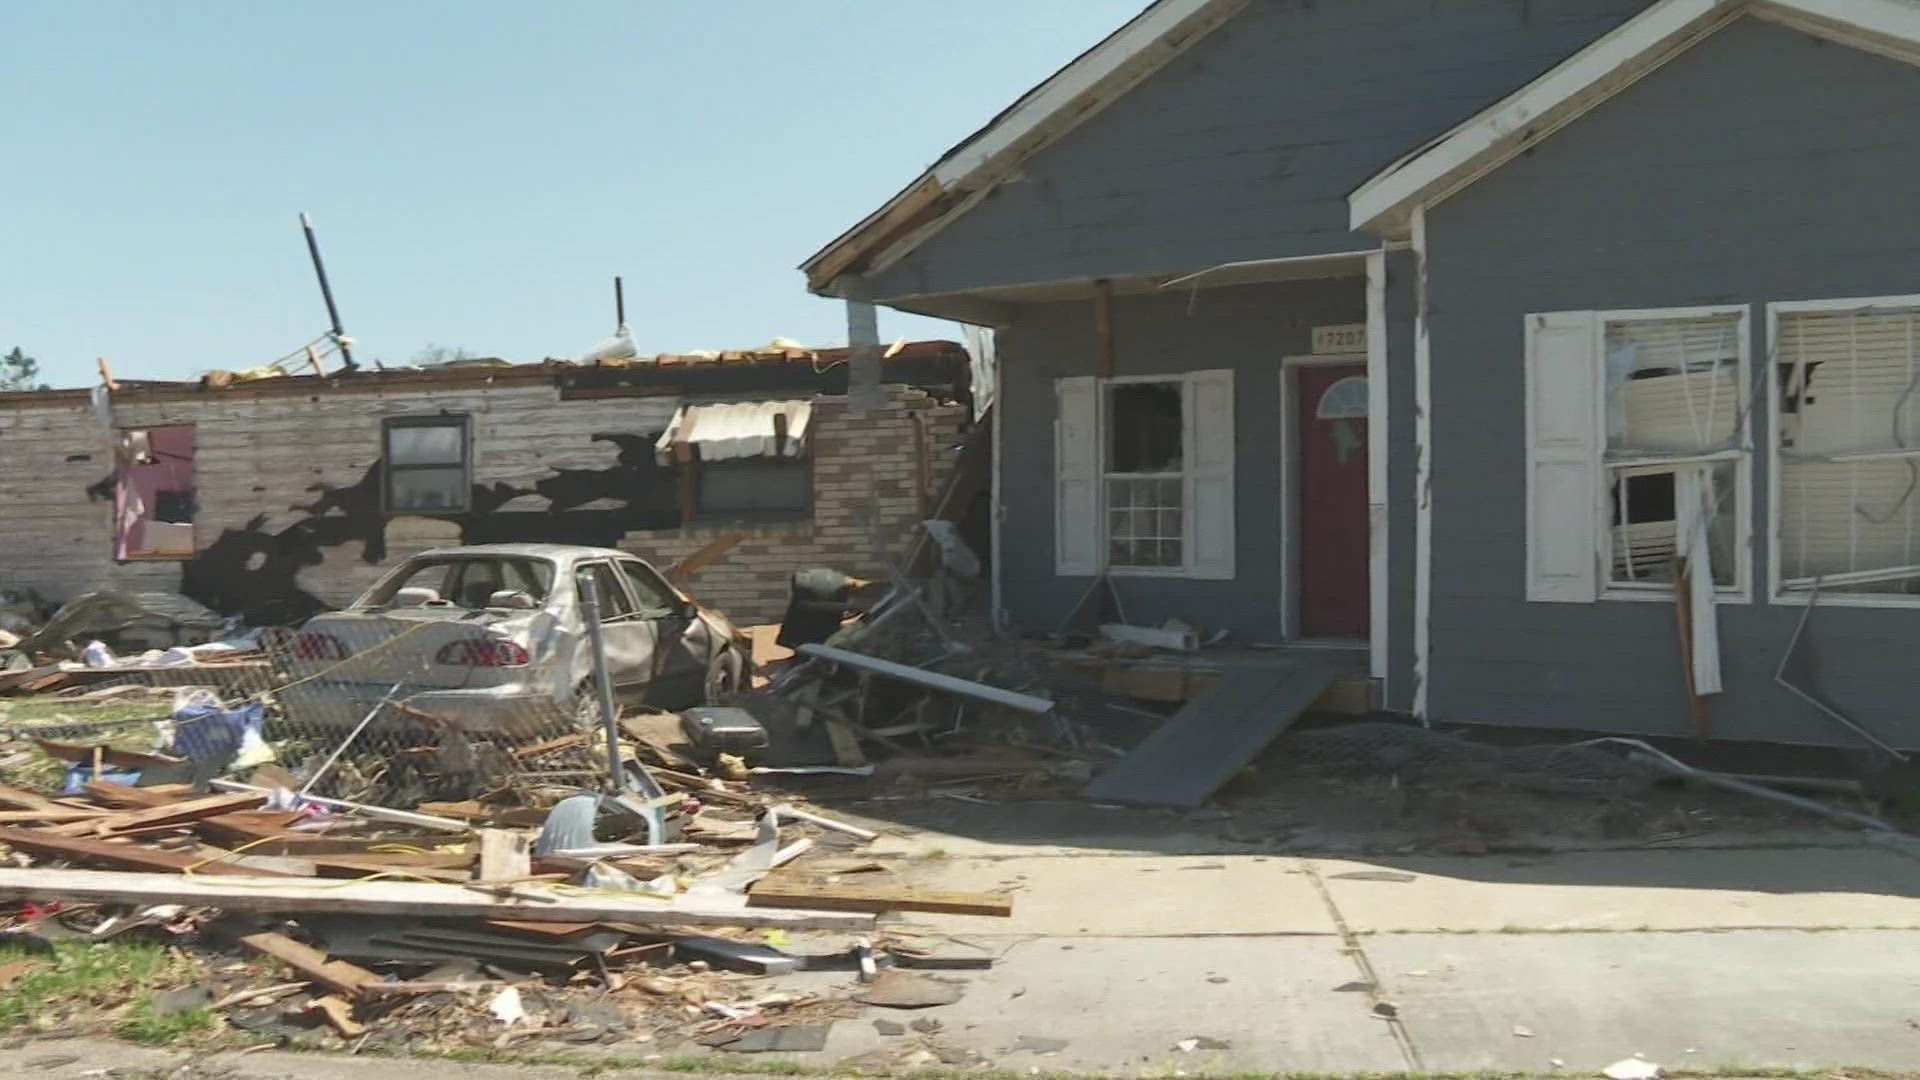 An Arabi family is not sure how to start the rebuilding process after a tornado destroyed their home days ago.